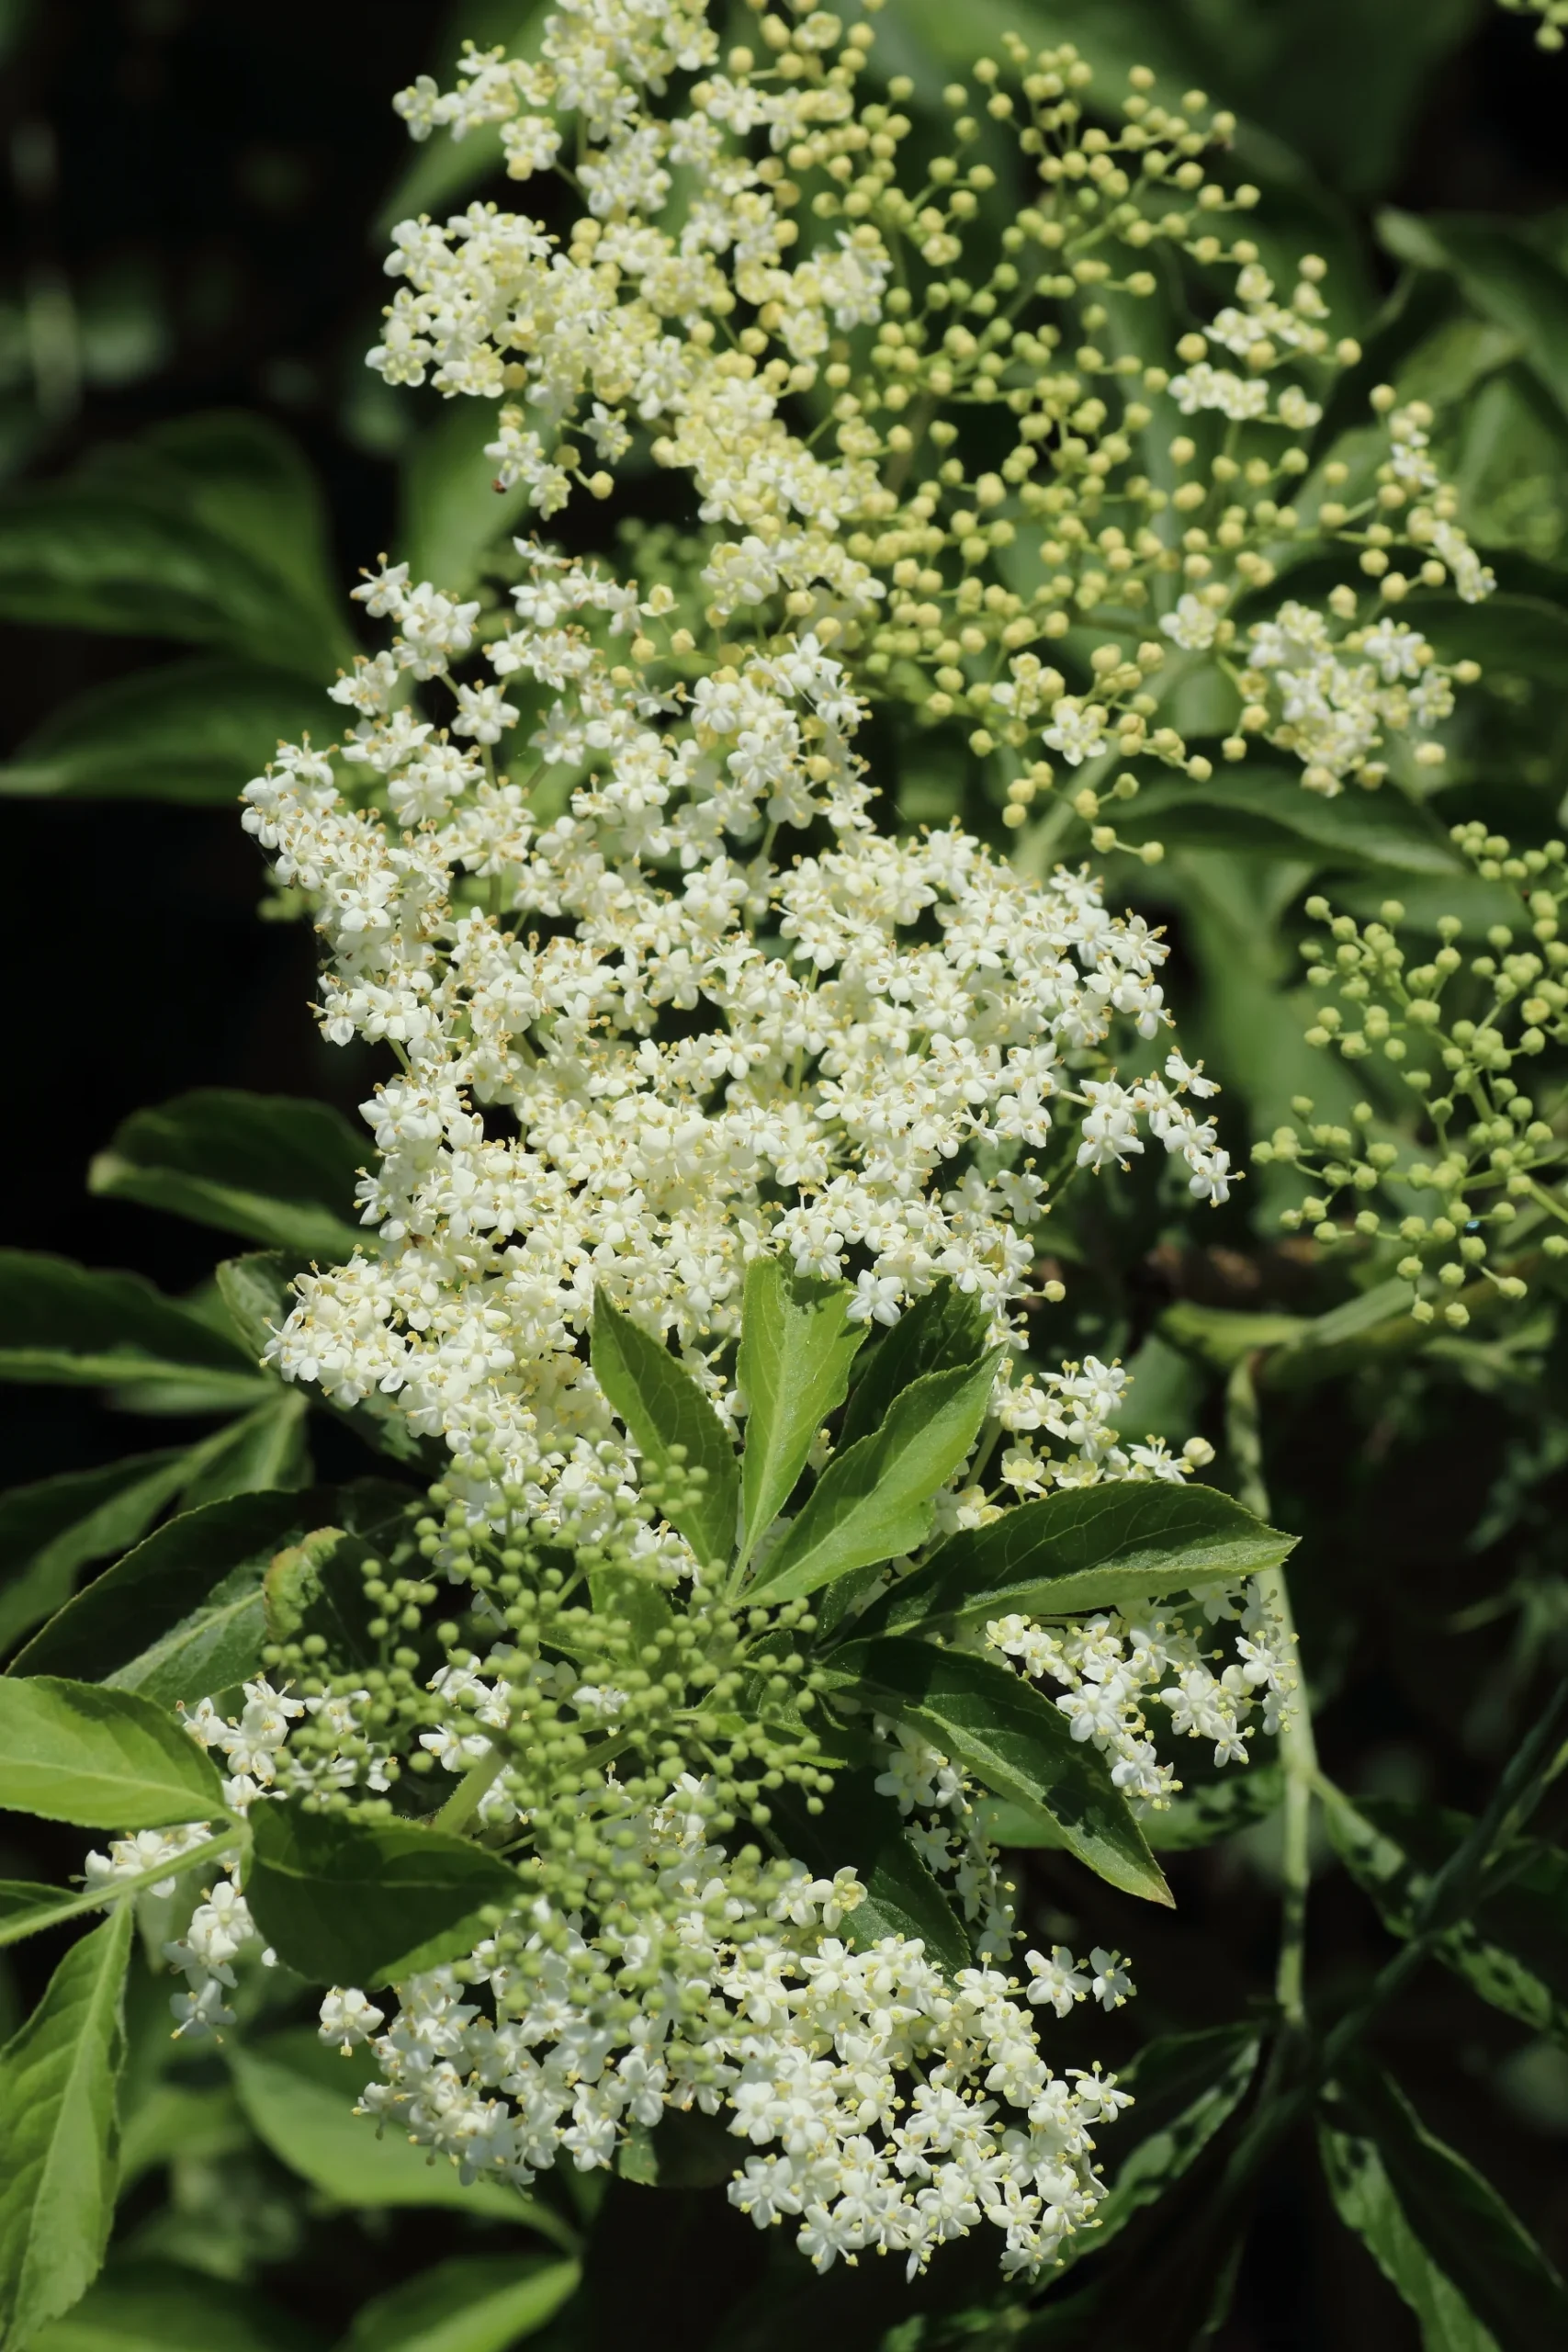 Black elderberry - The white umbels consist of a large number of individual flowers. These consist of 5 petals.